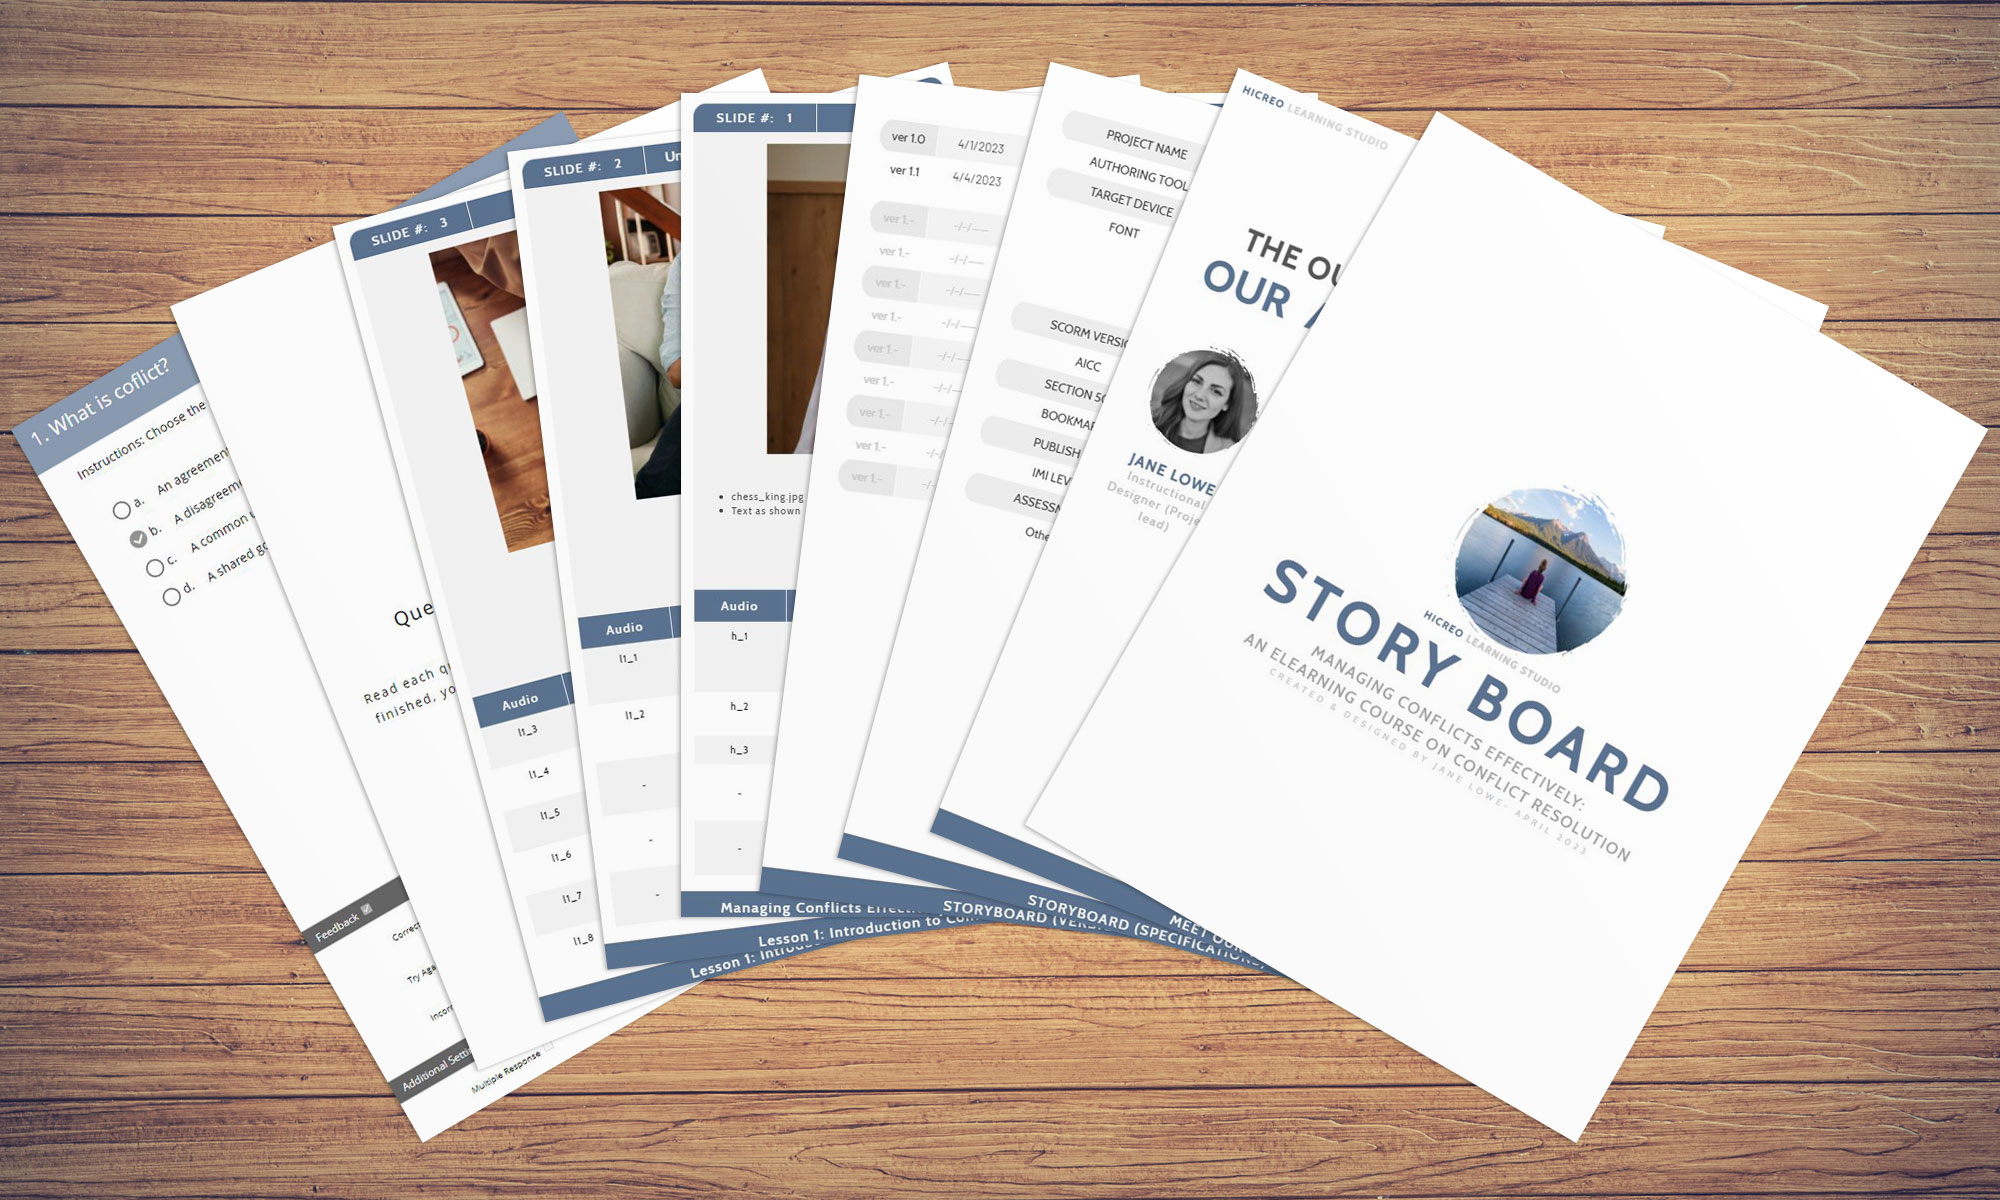 eLearning storyboard templates spread on a desk with the course title 'Managing Conflicts Effectively: An eLearning Course on Conflict Resolution' created using the hiCreo platform